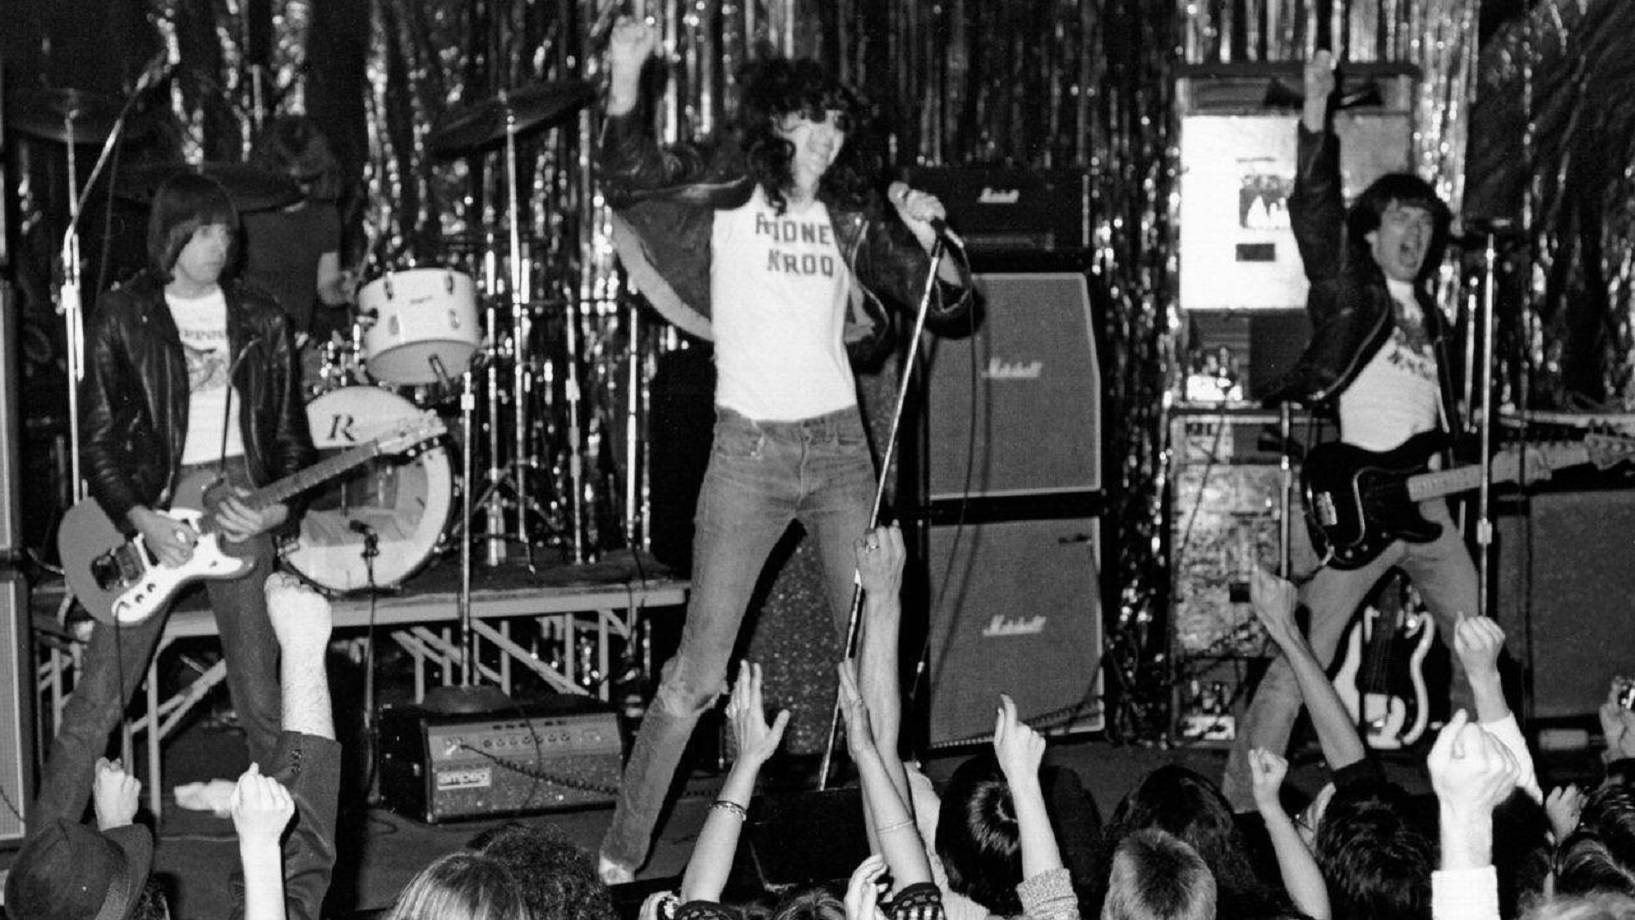 Era-defining American Punk Band, The Ramones In 1977 Background